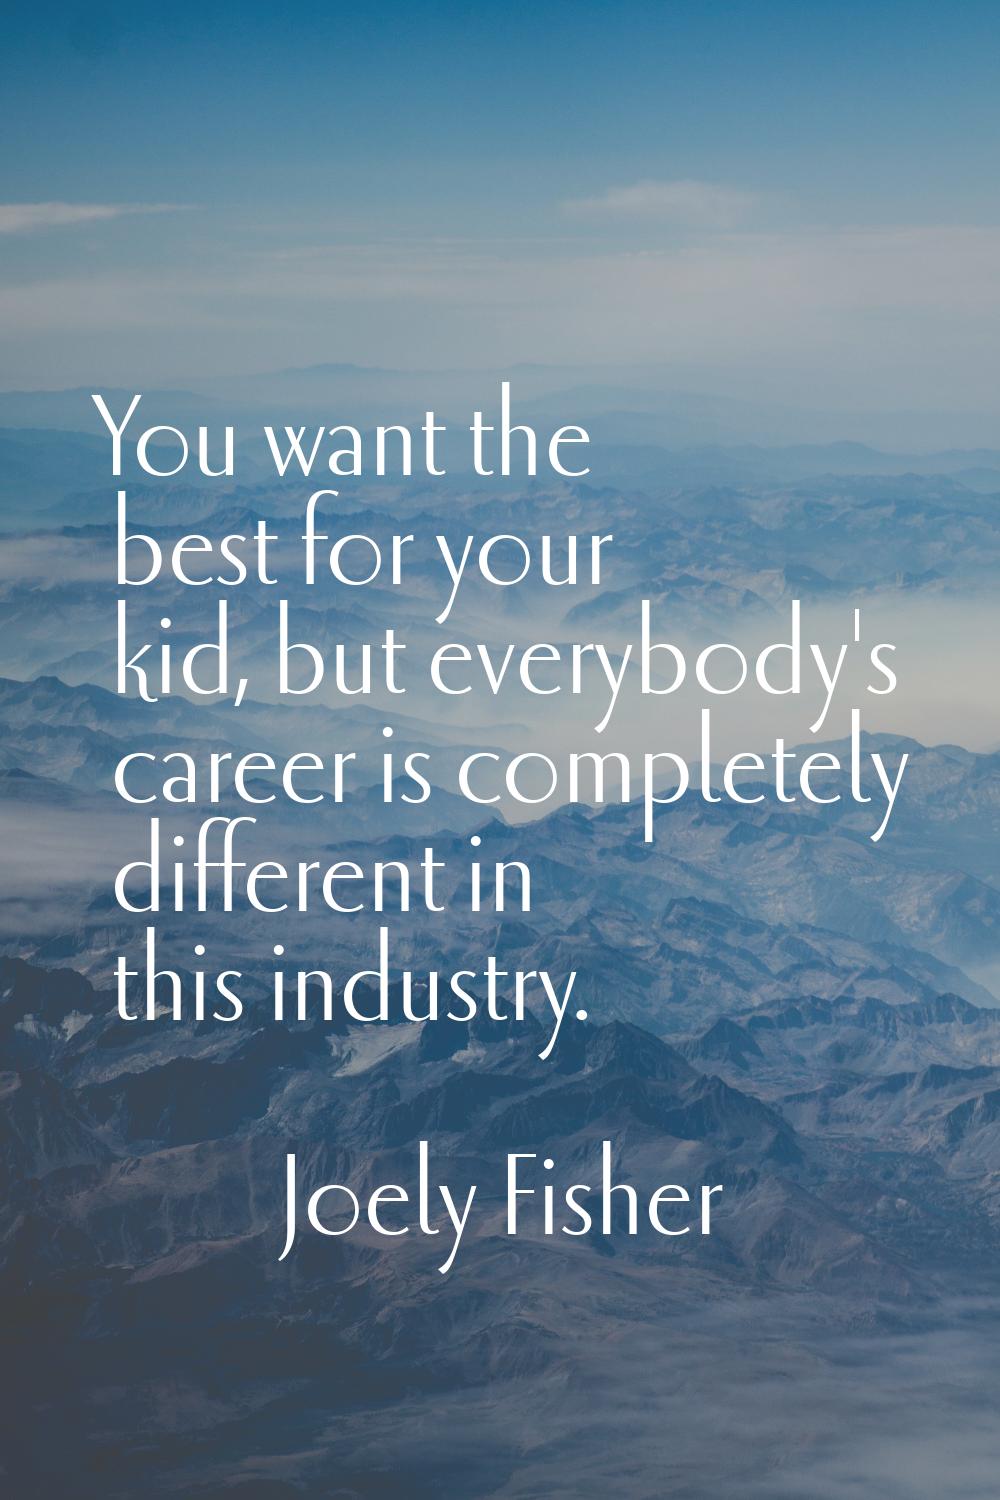 You want the best for your kid, but everybody's career is completely different in this industry.